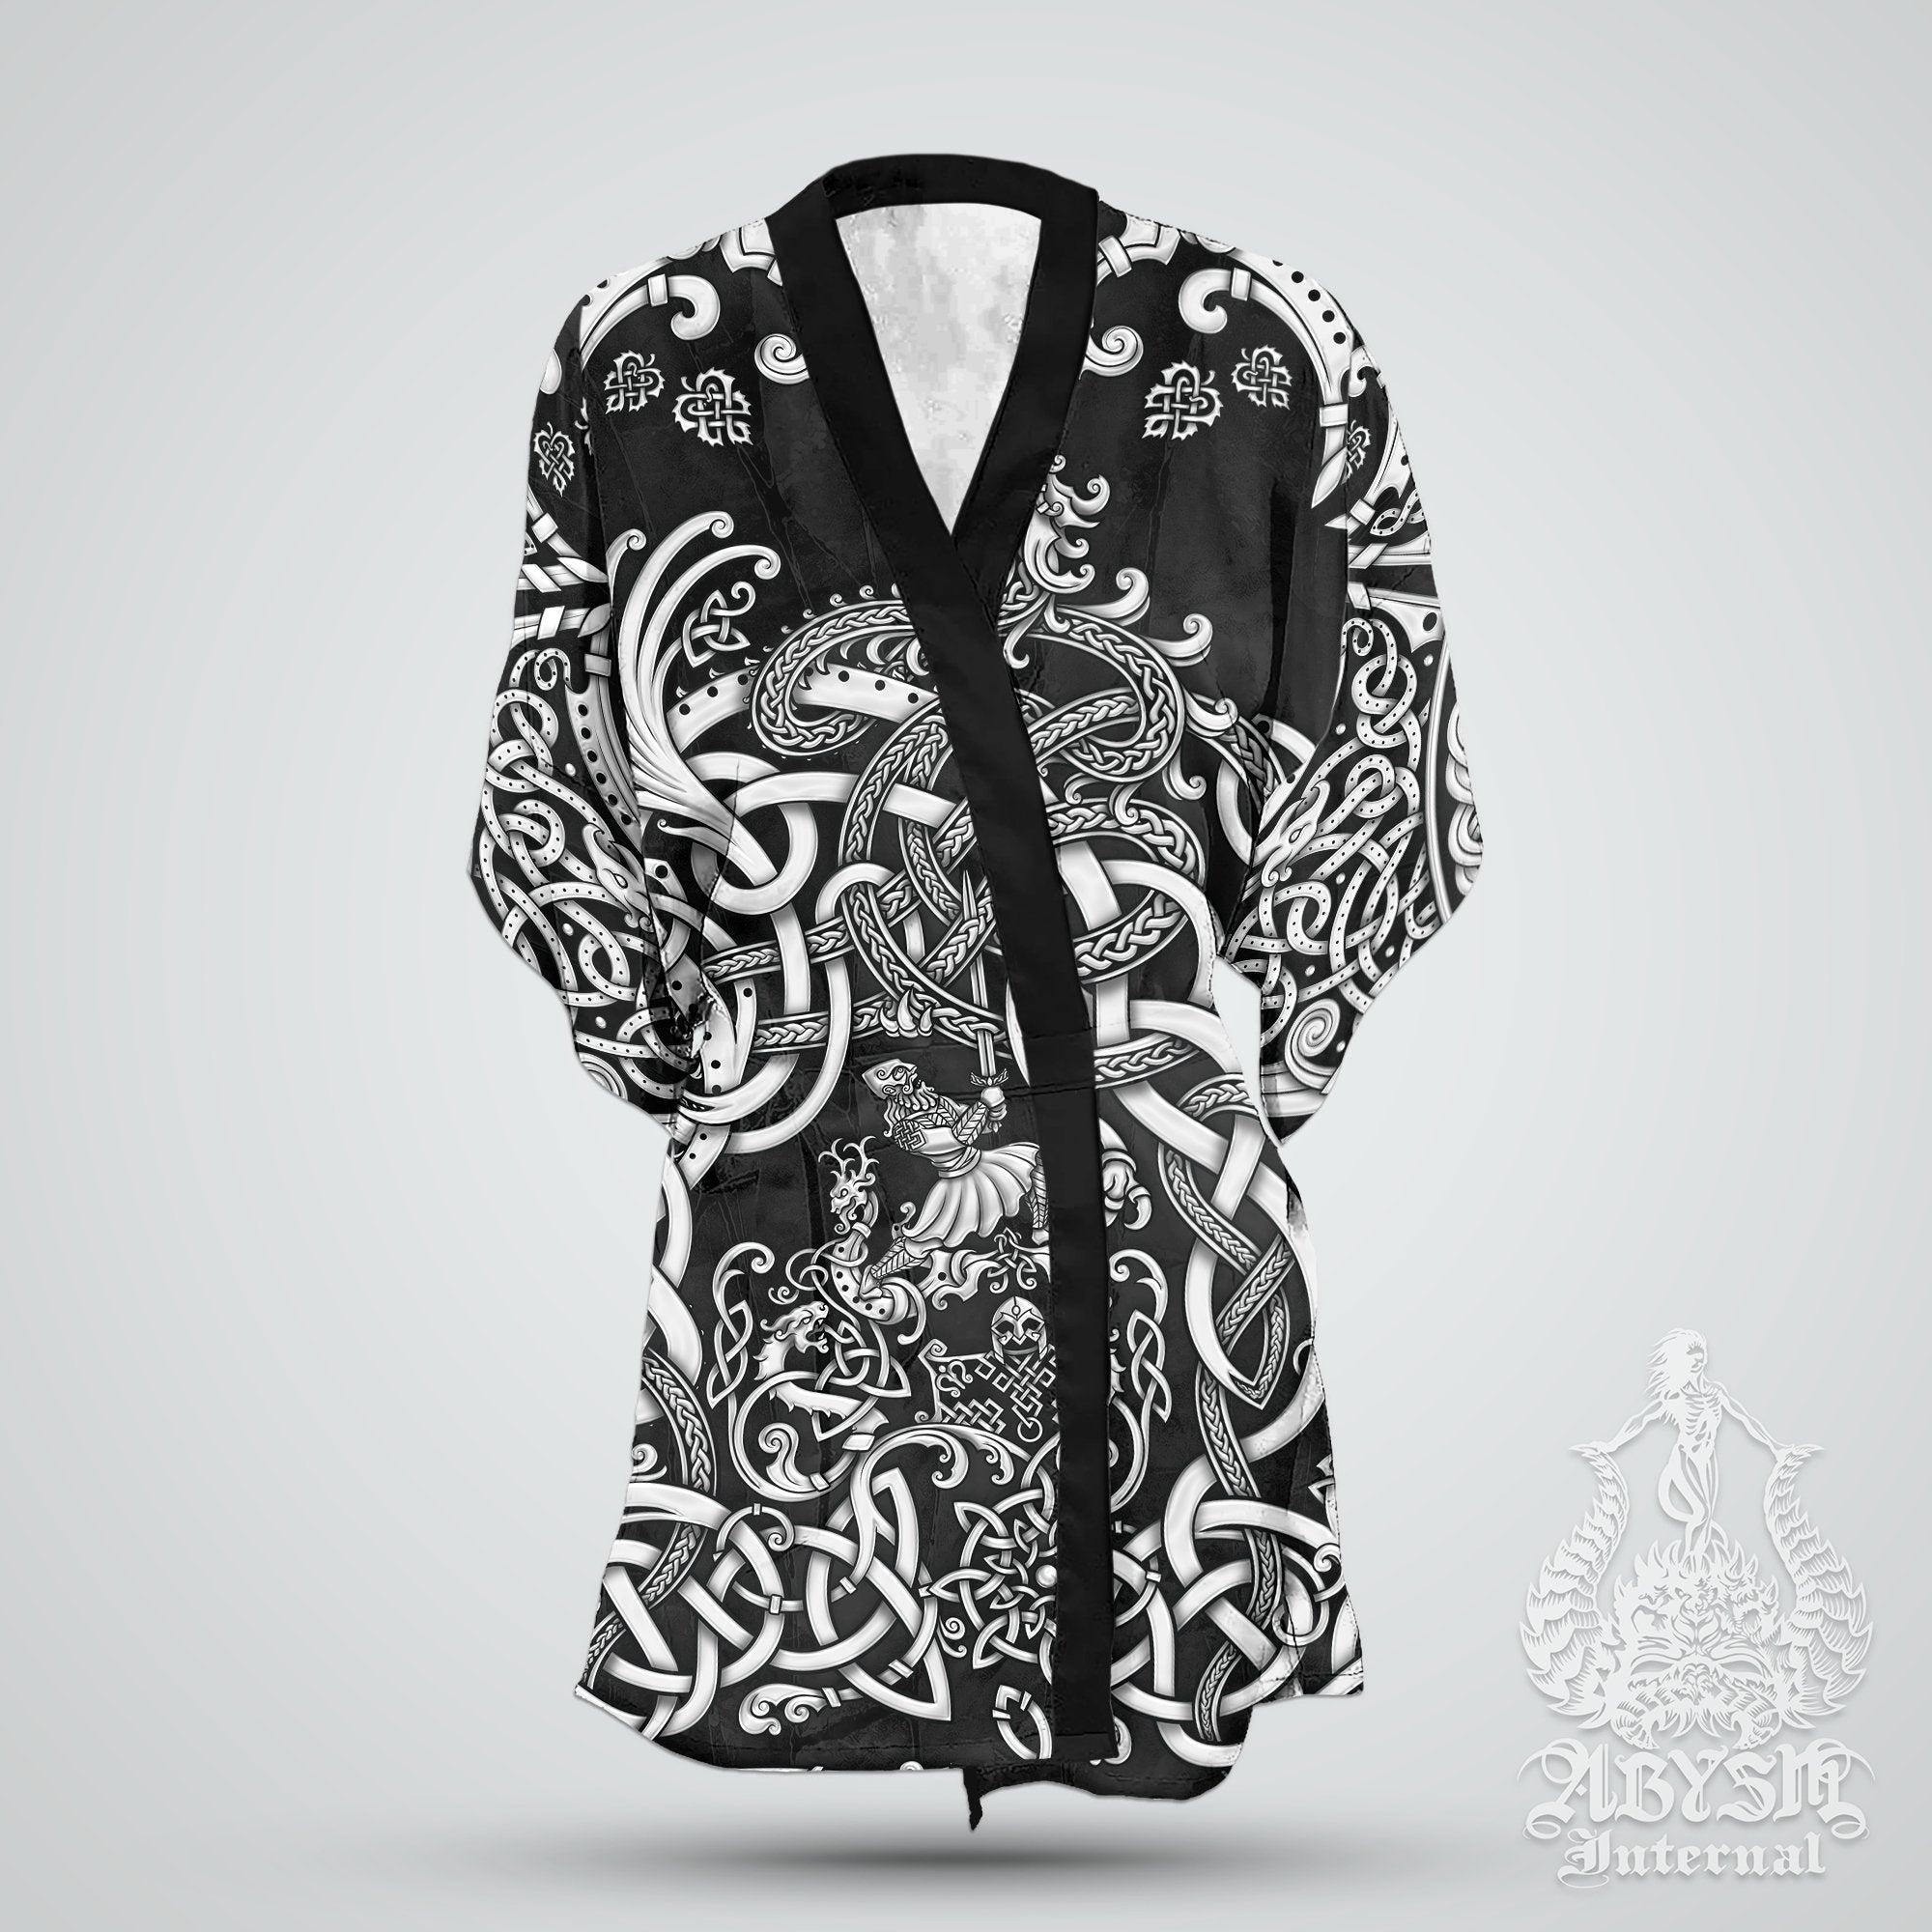 Viking Cover Up, Beach Outfit, Norse Party Kimono, Summer Festival Robe, Indie and Alternative Clothing, Unisex - Dragon Fafnir, White Black - Abysm Internal